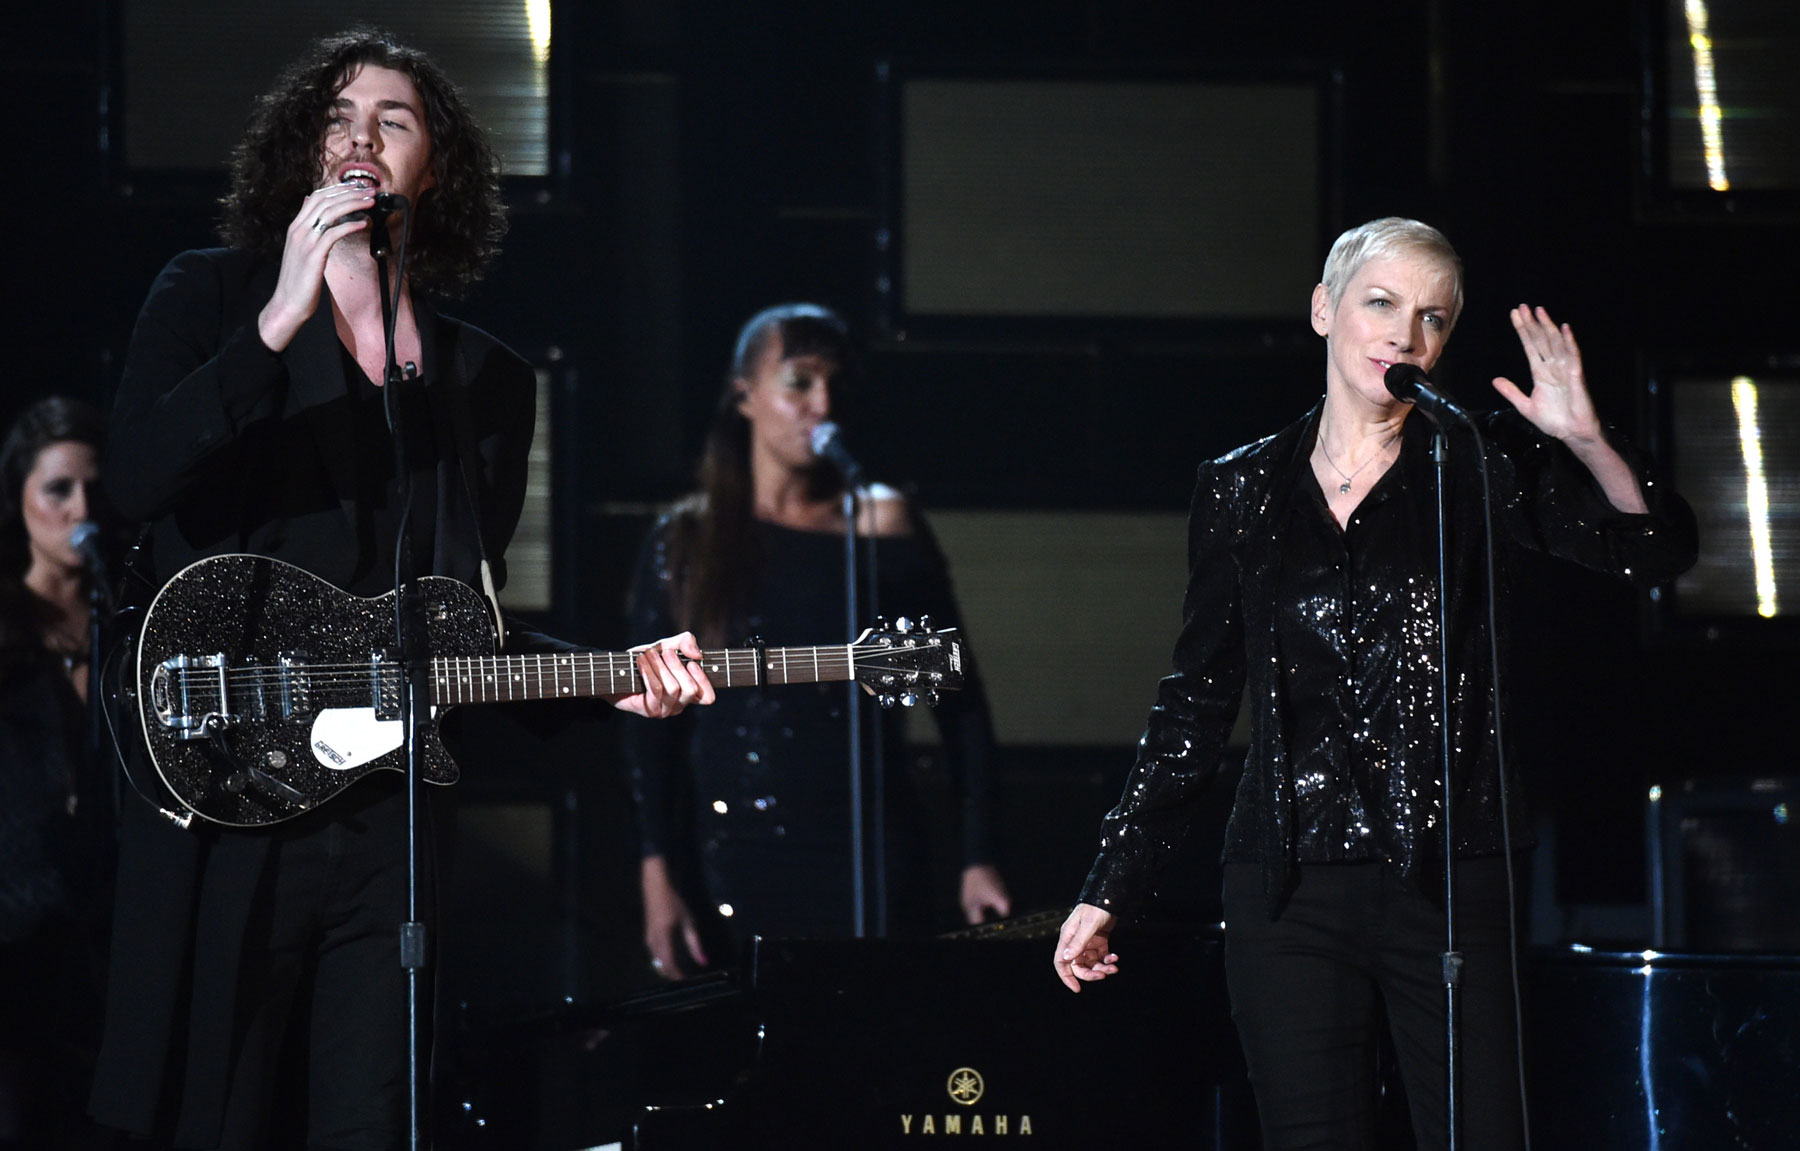 Hozier, left, and Annie Lennox perform at the 57th annual Grammy Awards on Sunday, Feb. 8, 2015, in Los Angeles. (Photo by John Shearer/Invision/AP)